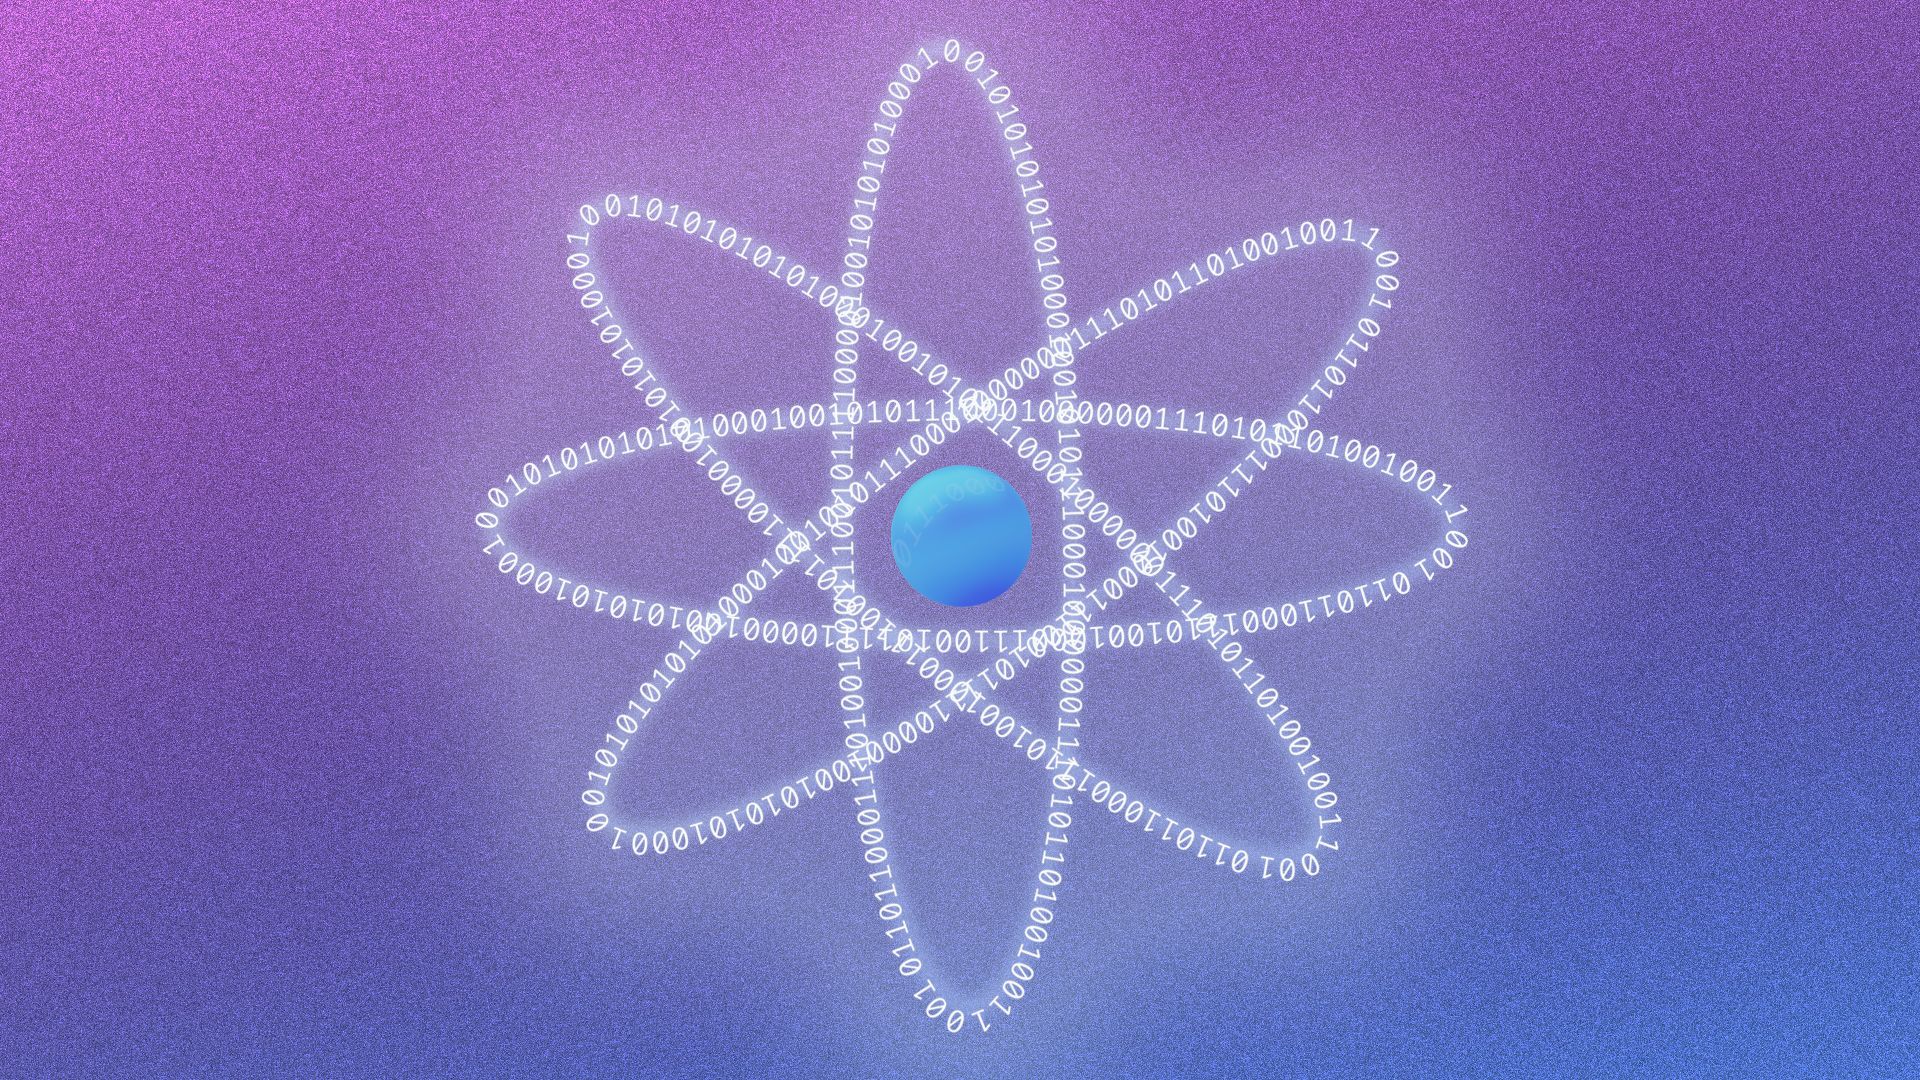 A blue orb is surrounded by binary strings, in the shape of an atom.